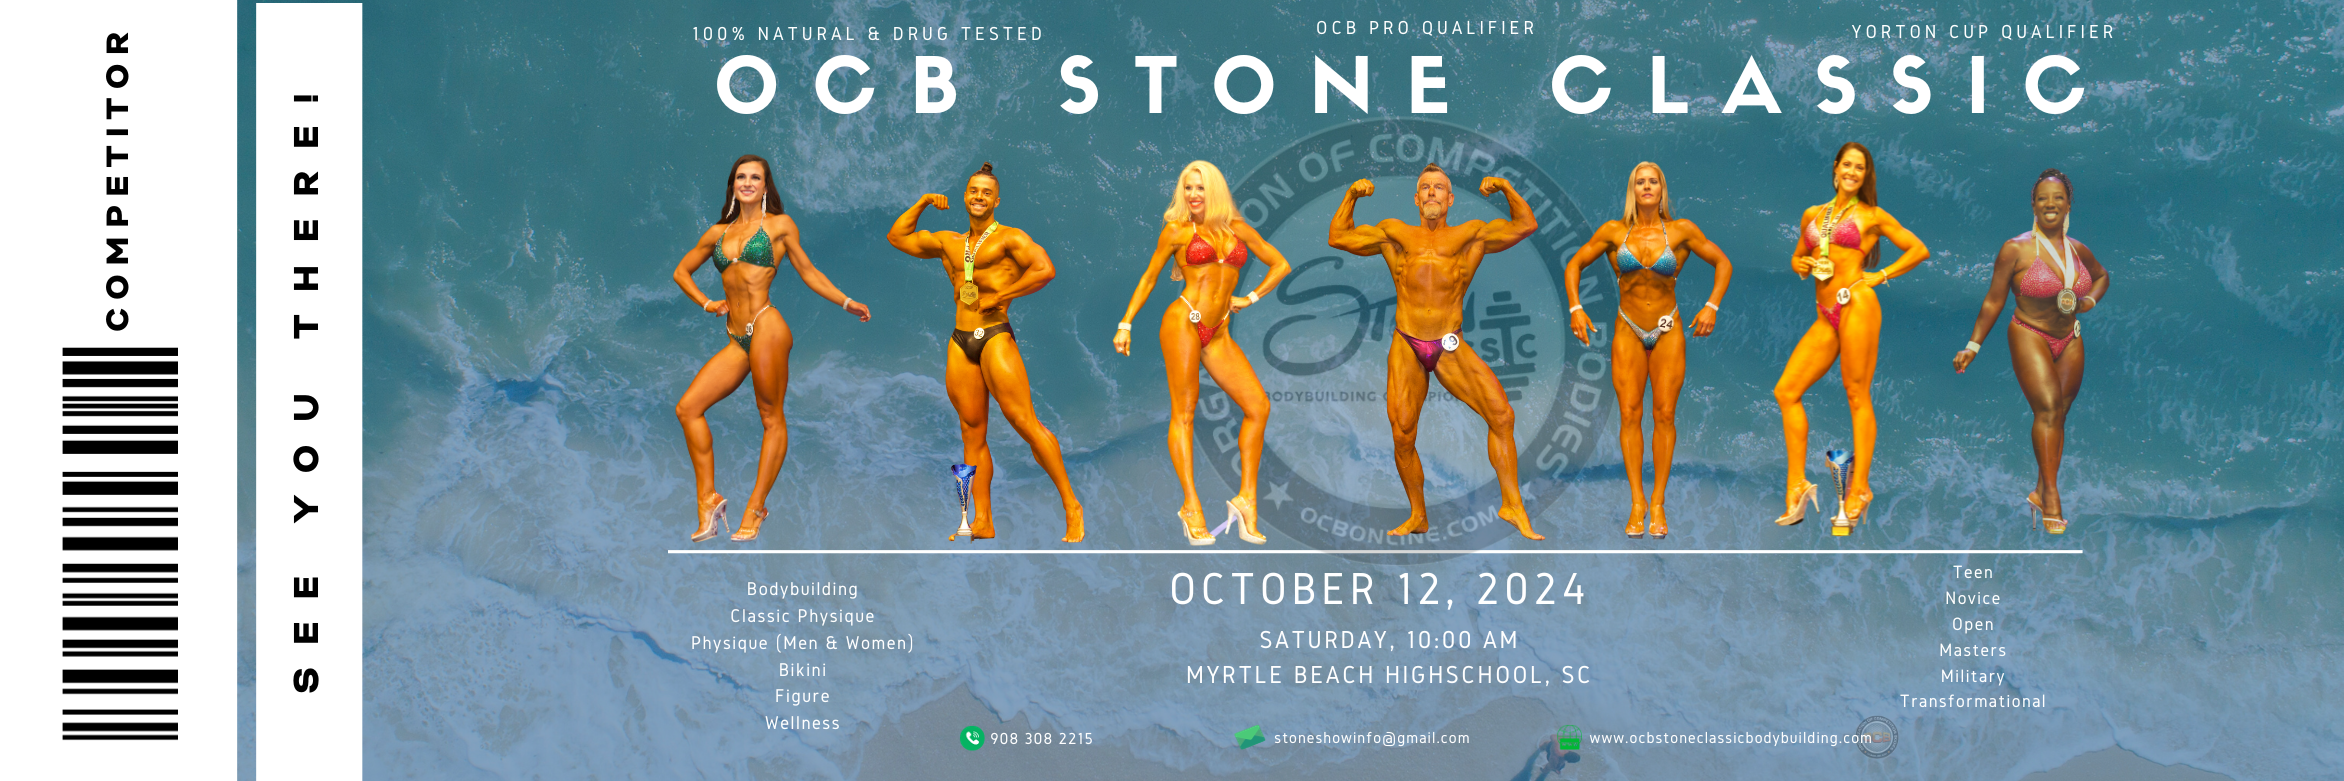 Men's Classic Physique Registration & One Crossover